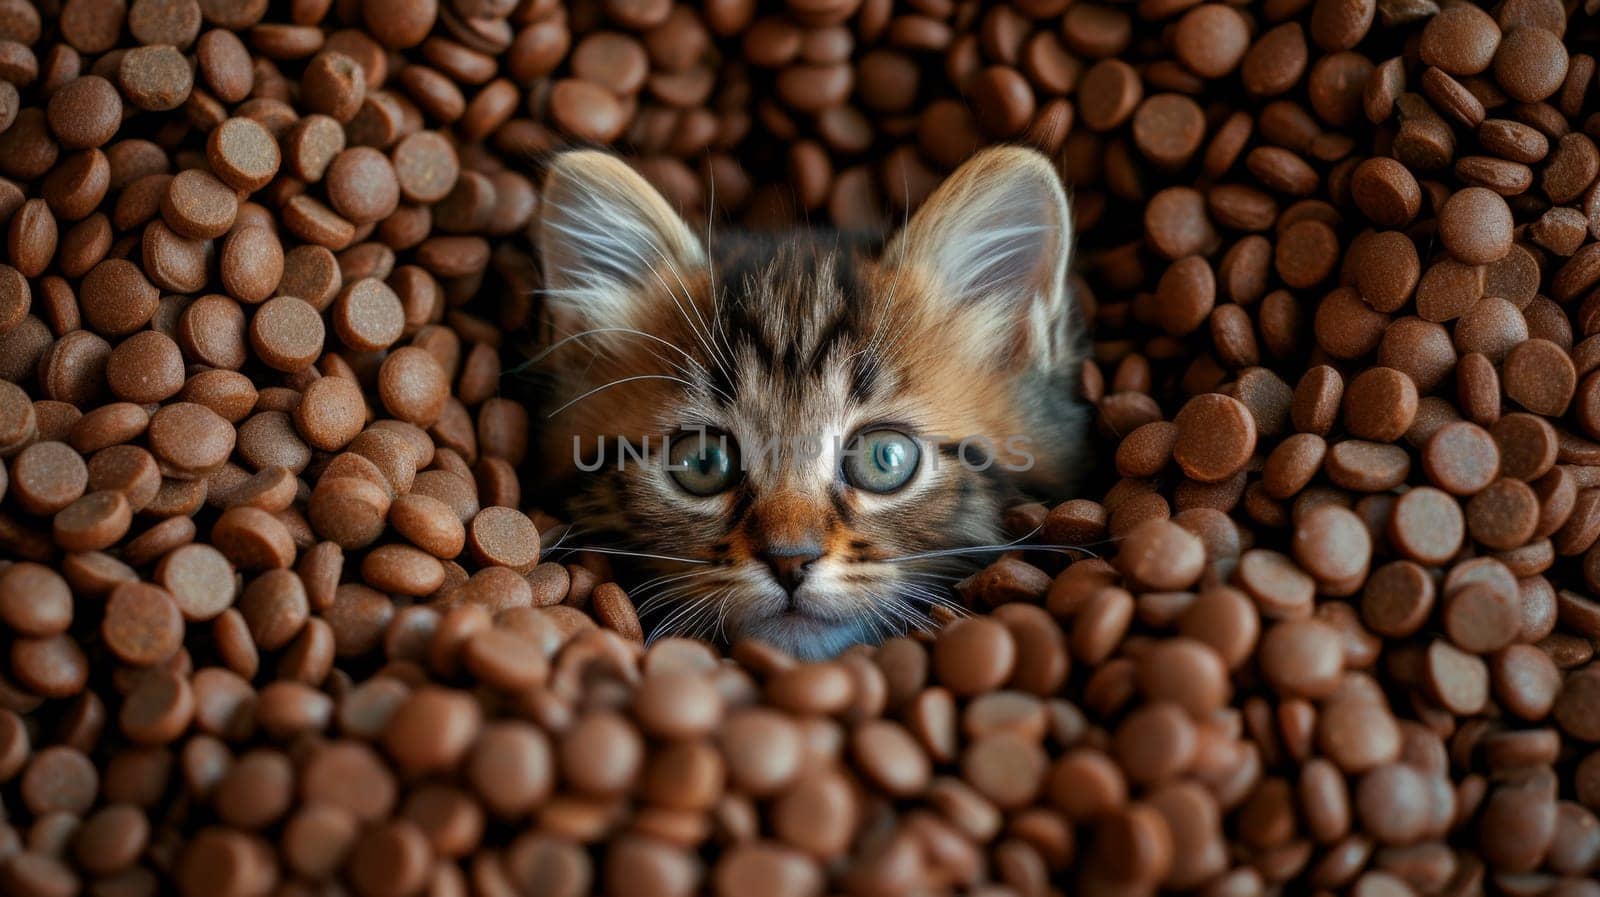 A kitten peeking out from a pile of chocolate beans, AI by starush